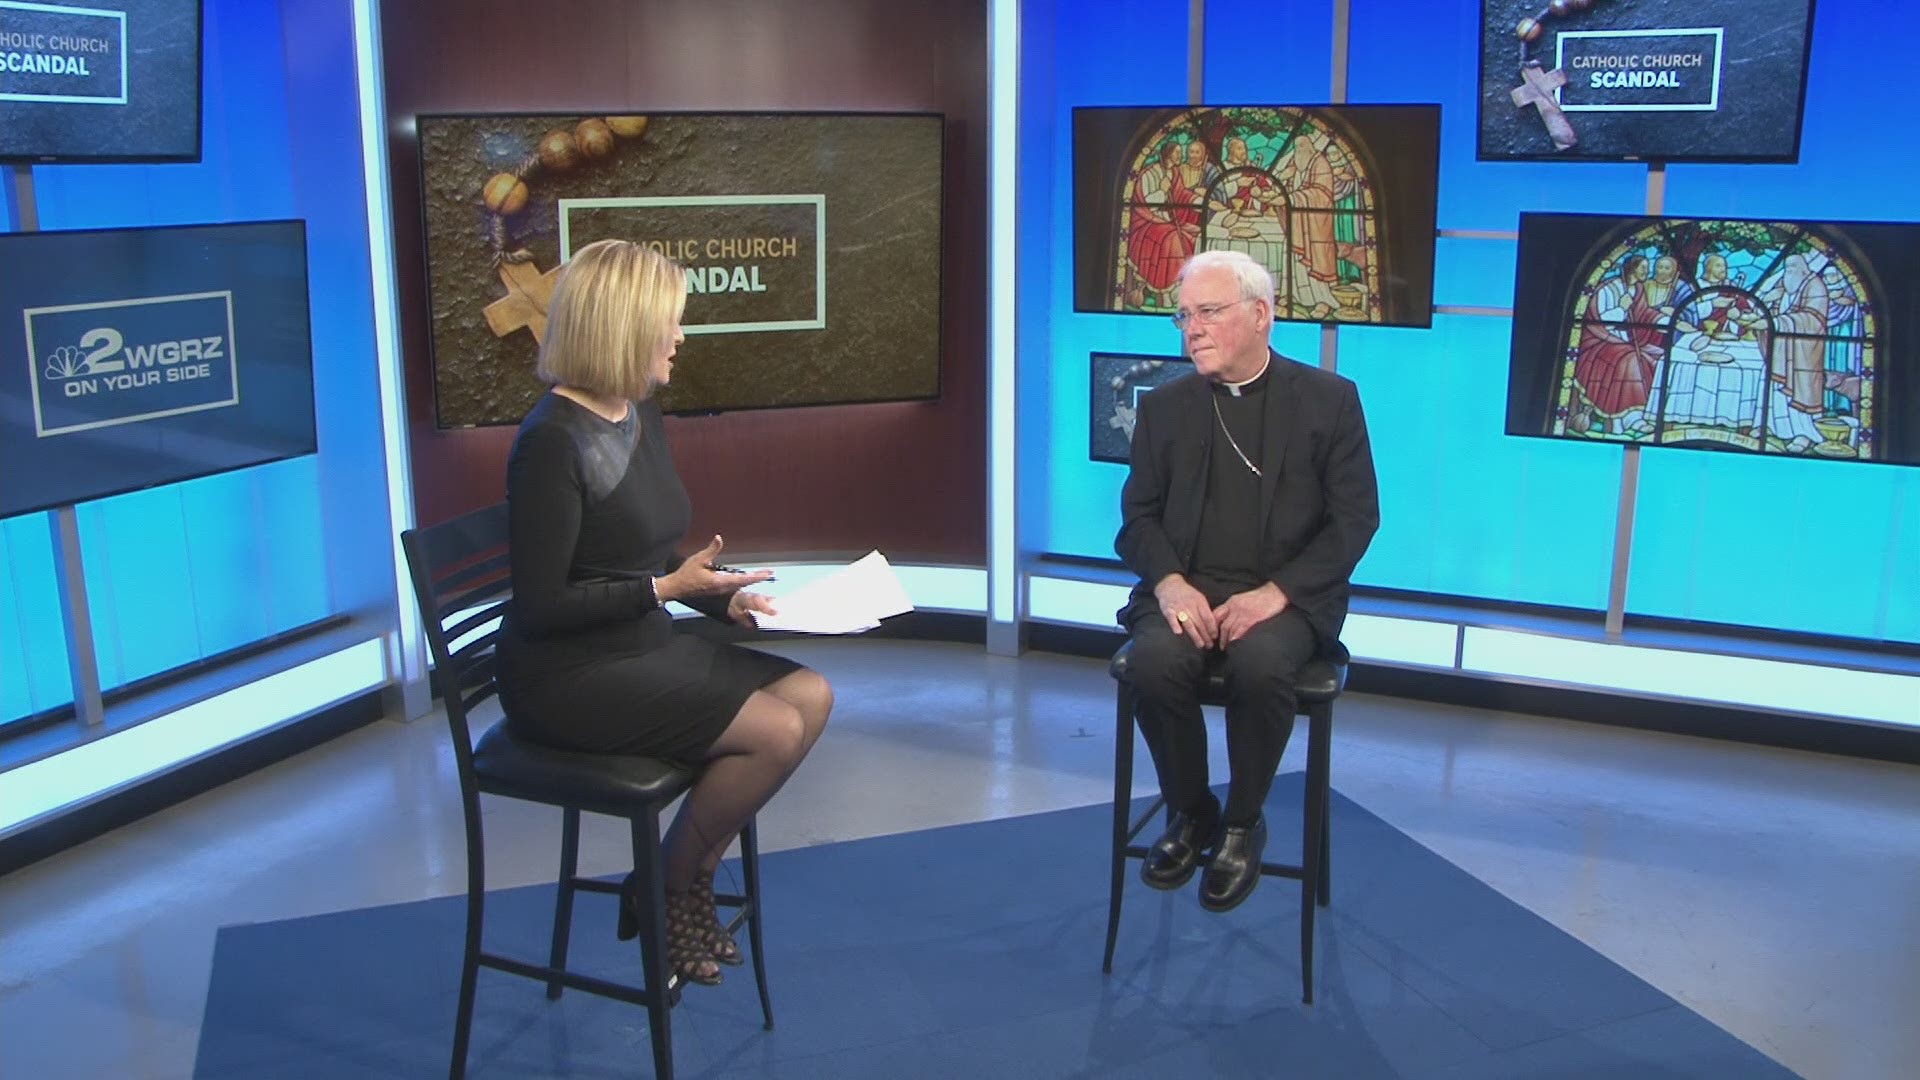 Bishop Richard Malone of the Buffalo Roman Catholic Diocese says he hopes for an opportunity to finish his work in Western New York as he tries to lead the congregation through the current priest abuse scandal.